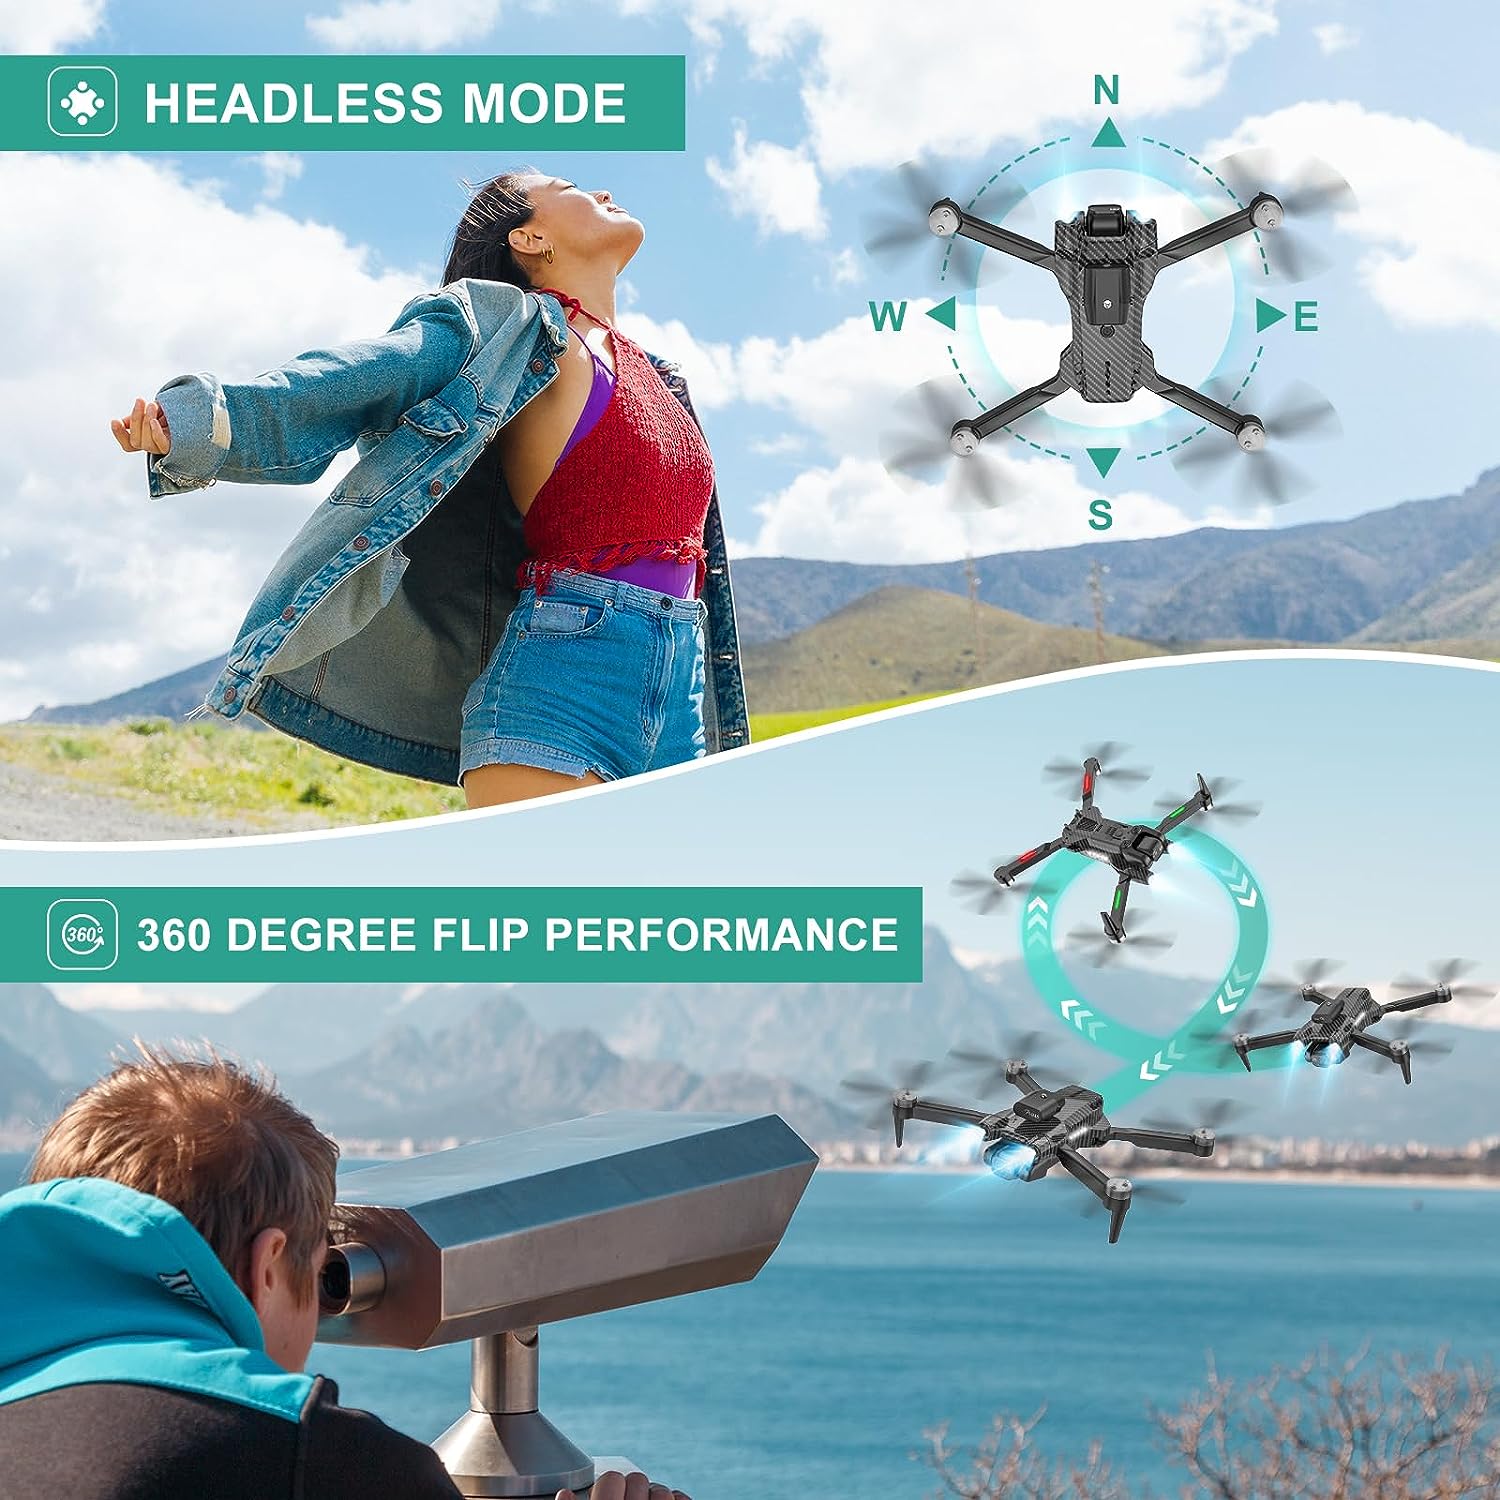 Mini drone Toy with camera: 4K HD FPV Mini Drone Toy - Foldable, Carrying Case, 90° Adjustable Lens, One Key Take Off/Land, Altitude Hold, 360° Flip, 2 Batteries, Obstacle Avoidance, Hovering Protection